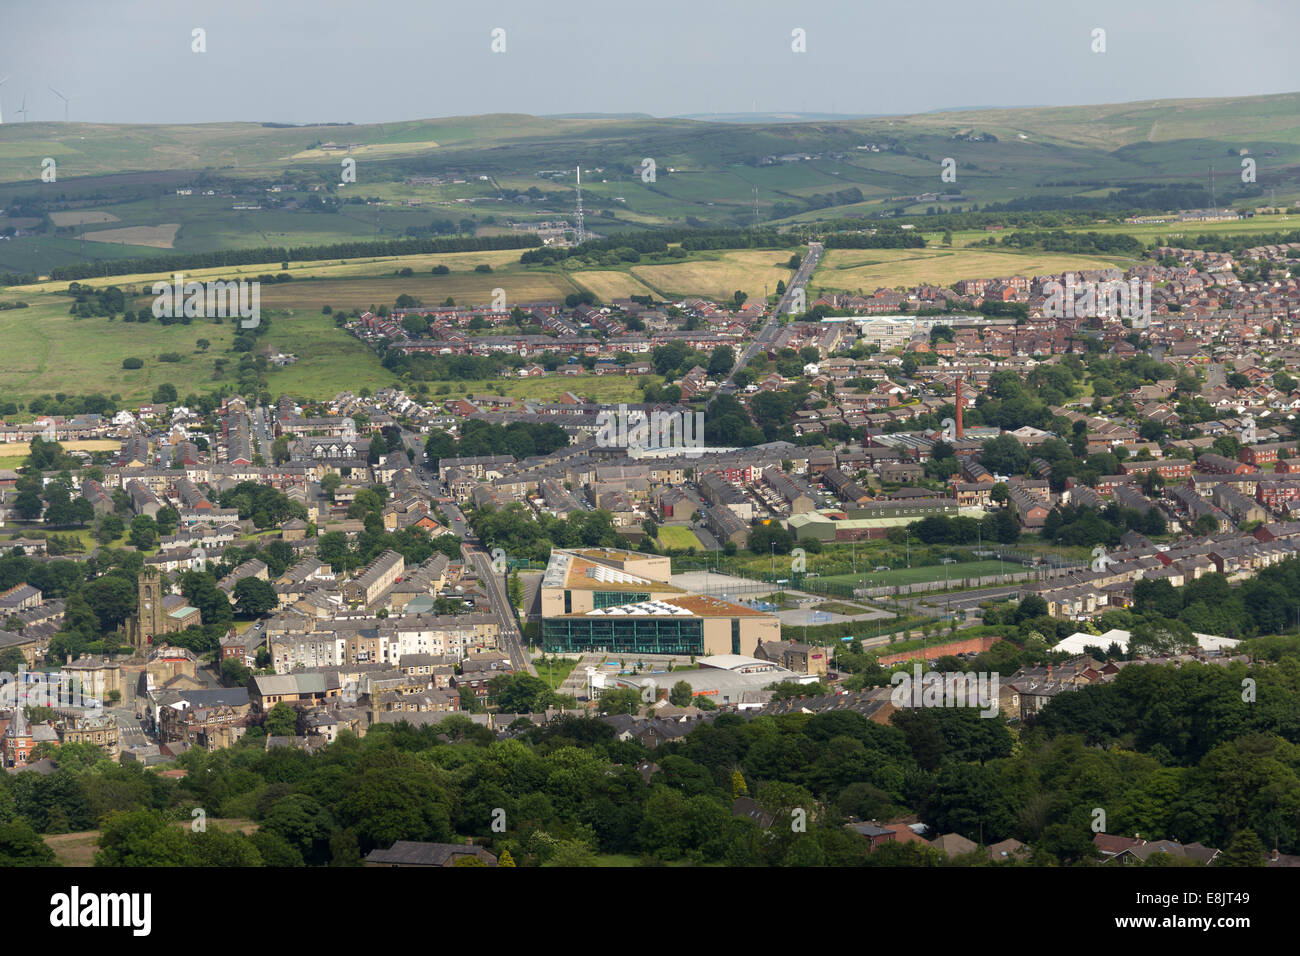 High angle townscape of Darwen, Lancashire. View north-east taken from Darwen Hil and looking over Darwen Leisure centre and the Stock Photo